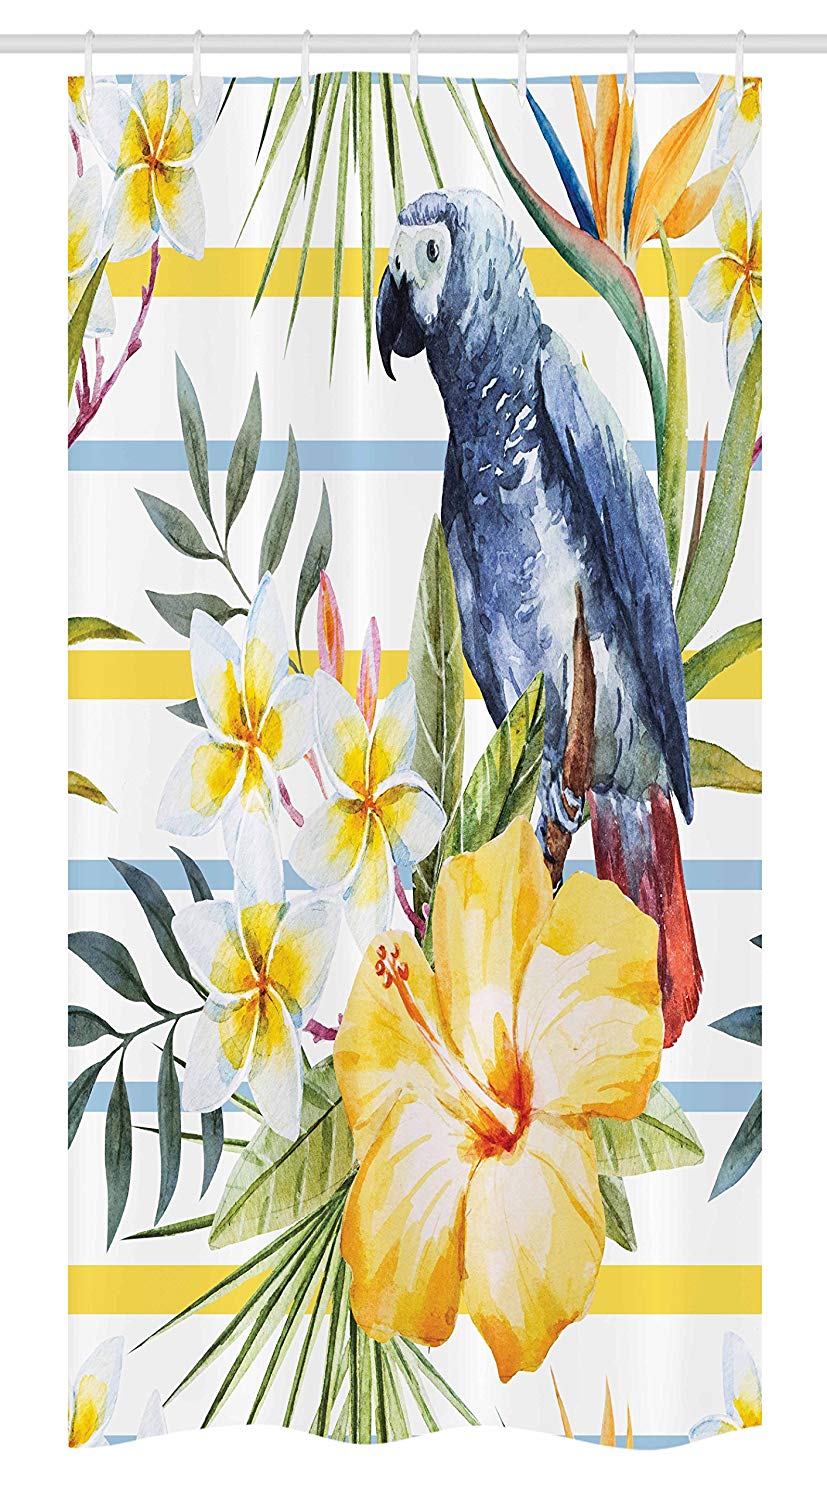 Ambesonne Parrot Stall Shower Curtain, Tropic Pattern with Parrot Orchids and Hibiscus Flowers Hawaiian Jungle Style Image, Fabric Bathroom Decor Set with Hooks, 36